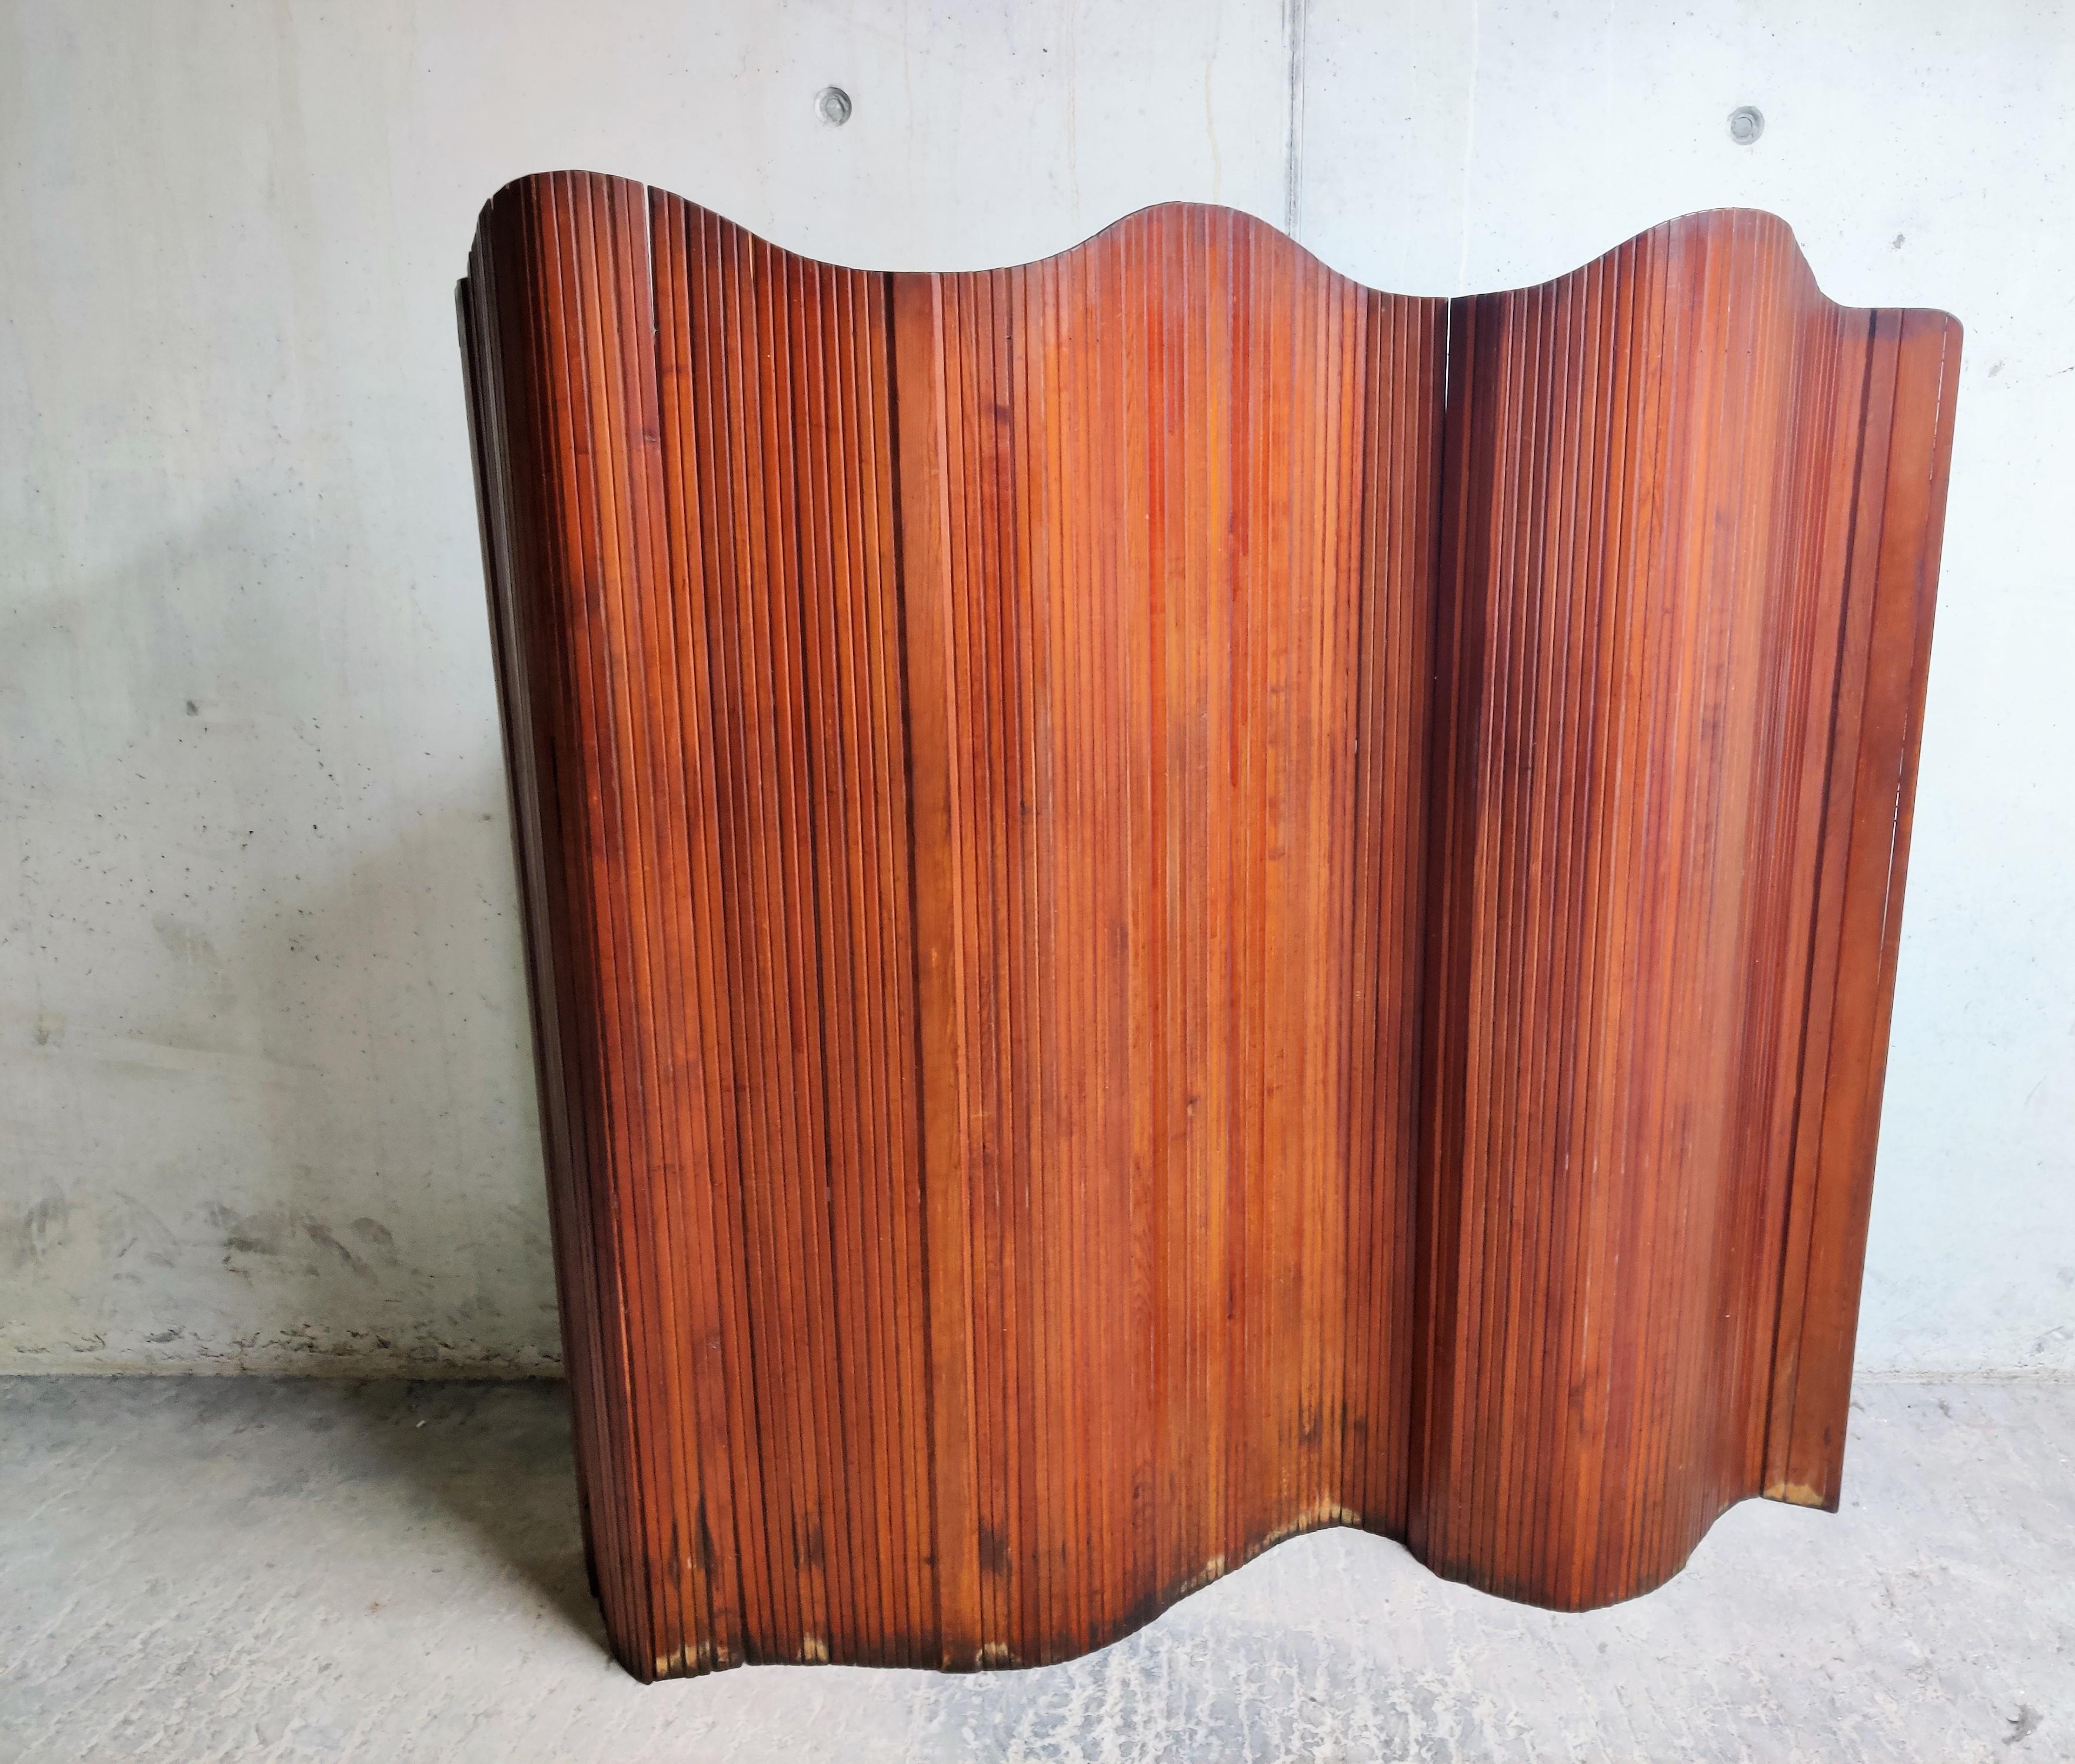 Antique pinewood 'lamelle' room divider by Jomain Baumann, it can be rolled up and is easy to store away.

Good condition, minor wear due to age.

1930s, France

Measures: H 71 in. x W 83.5 in. x D .25 in.
H 180.34 cm x W 212.09 cm x D 6.35